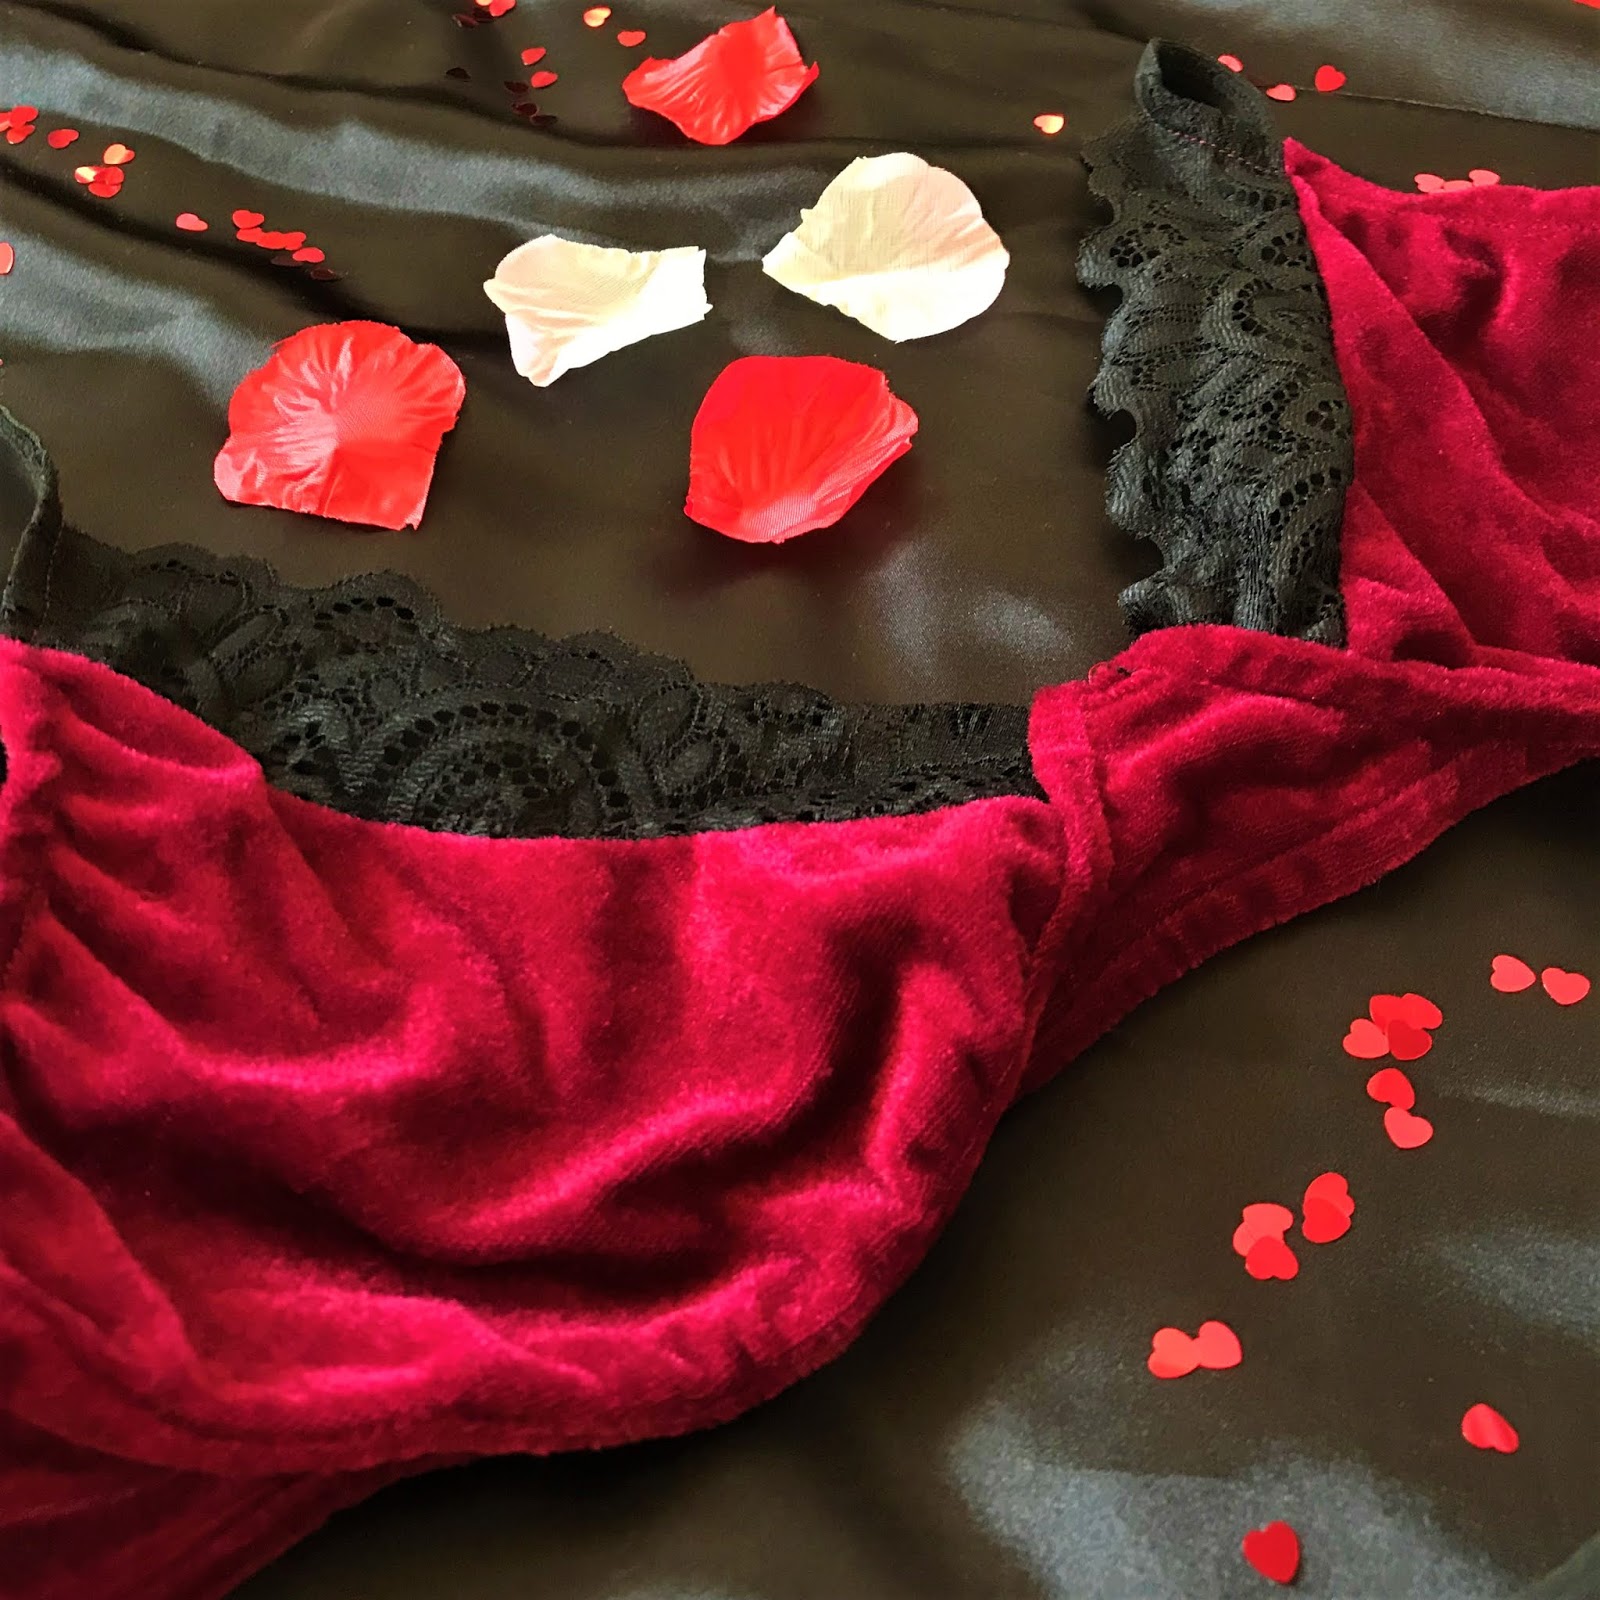 Affordable SHEIN Valentines Lingerie Haul ❤ - ○ Laura Thornberry